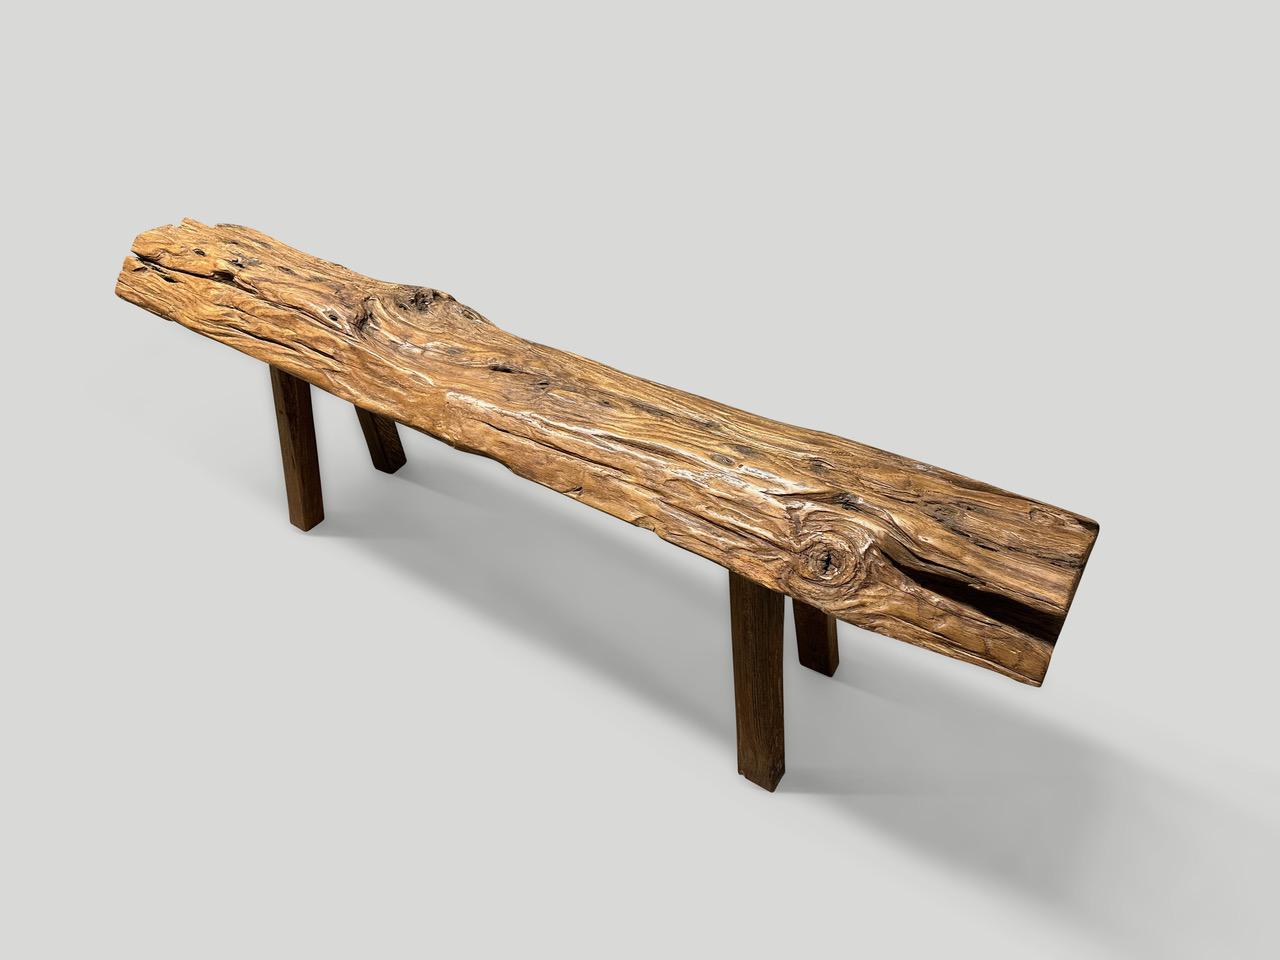 Andrianna Shamaris Antique Teak Wood Log Style Bench In Excellent Condition For Sale In New York, NY